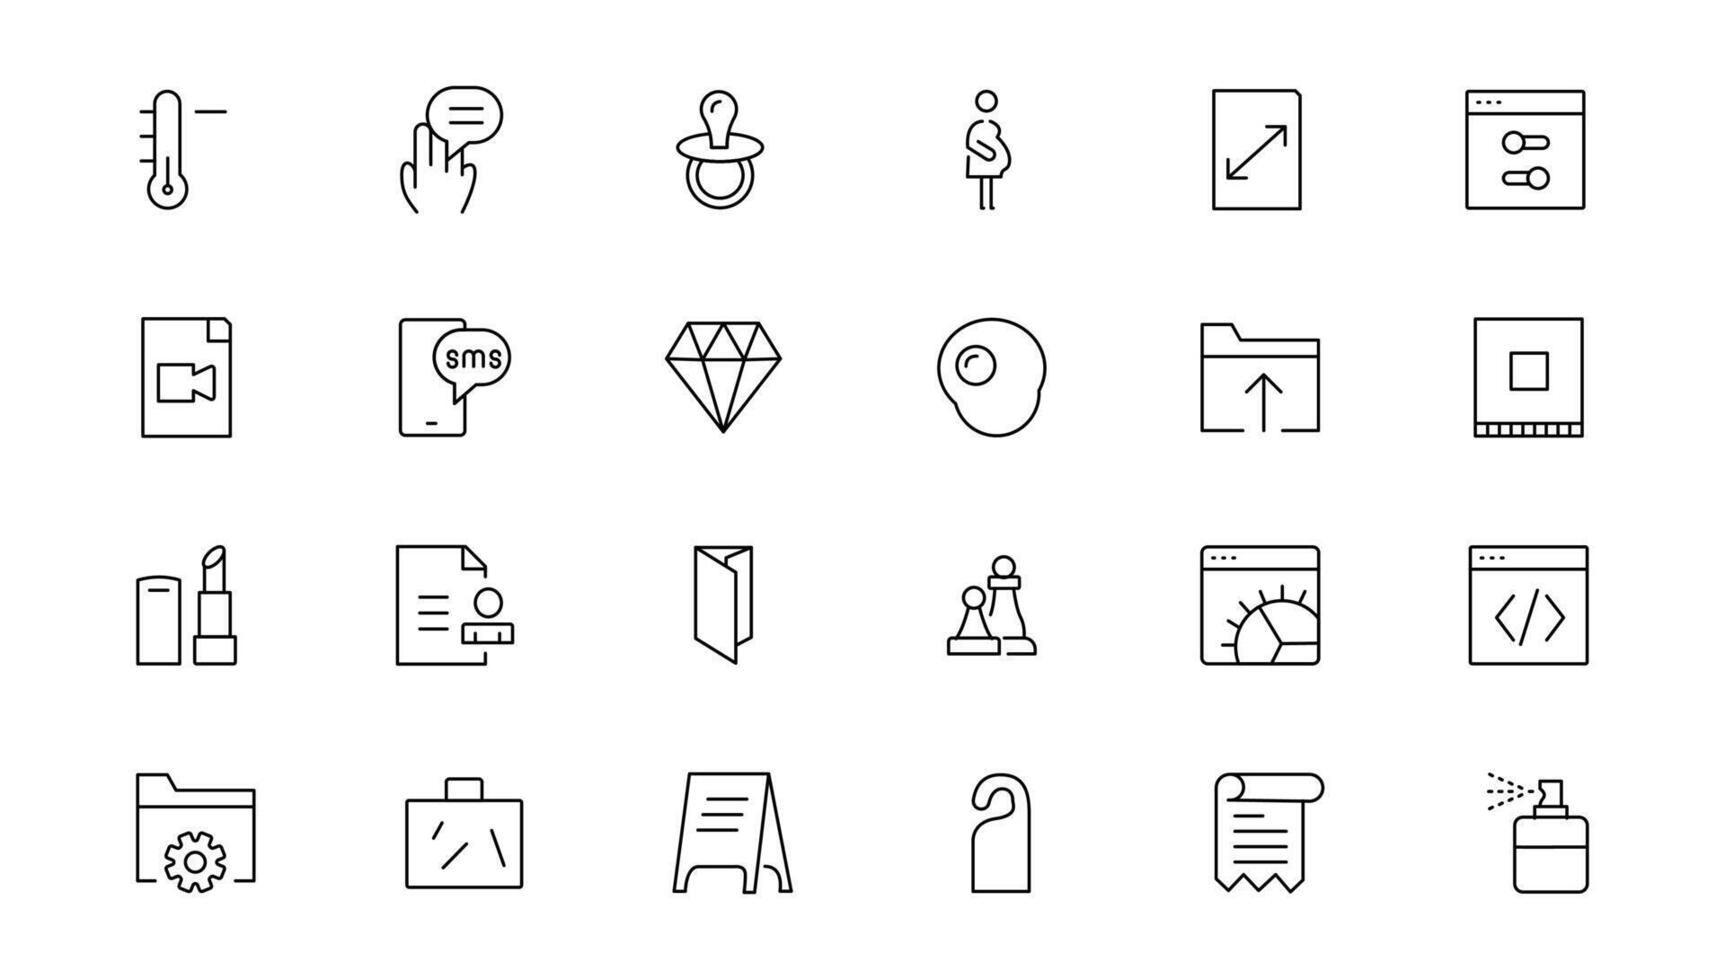 Set of thin line web icon set, simple outline icons collection, Pixel Perfect icons, Simple illustration vector